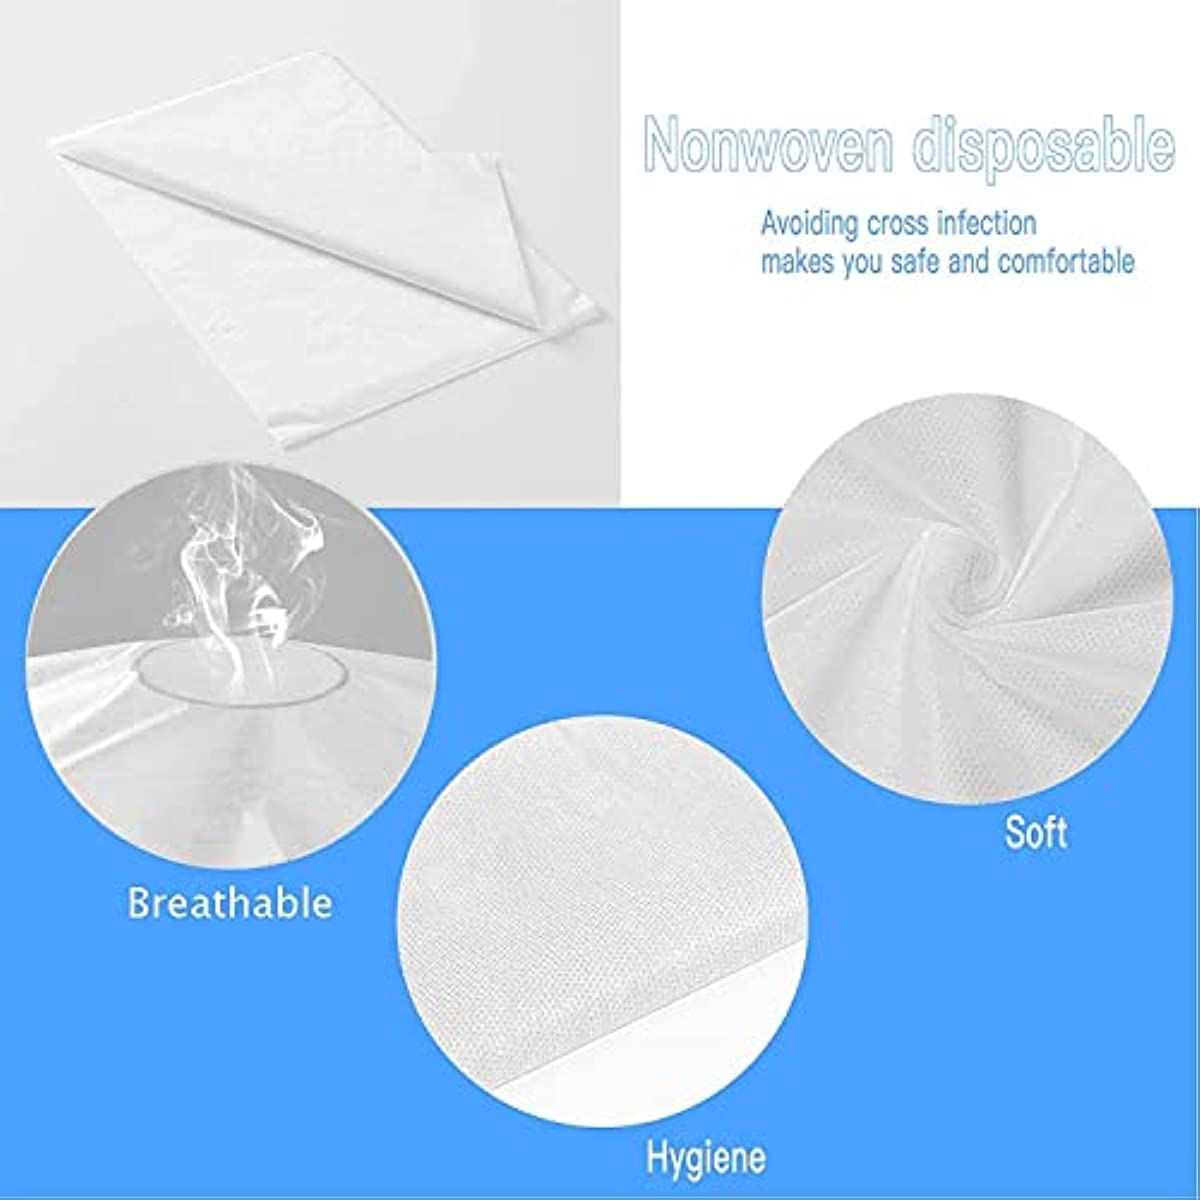 100 PCS Massage Table Sheets Disposable Non Woven SPA Bed Cover Breathable Polypropylene Fabric 31\" x 70\" Thin, Not Waterproof (White)